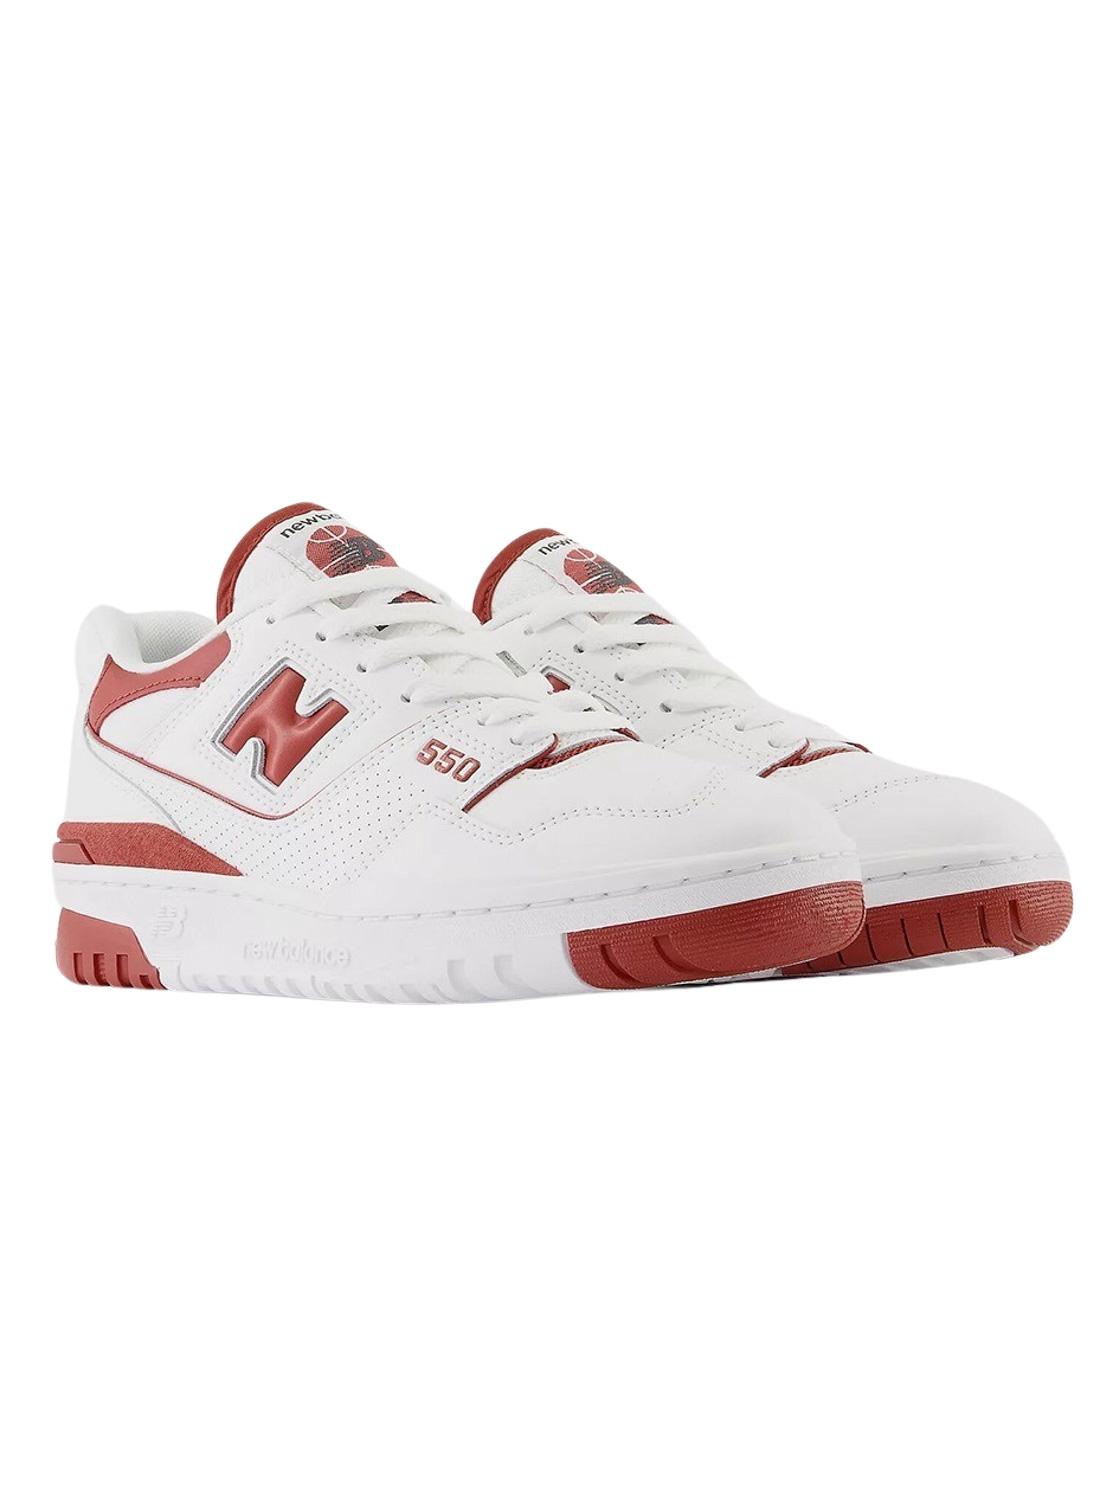 Sneakers New Balance BB550 Bianco Rosso Donna